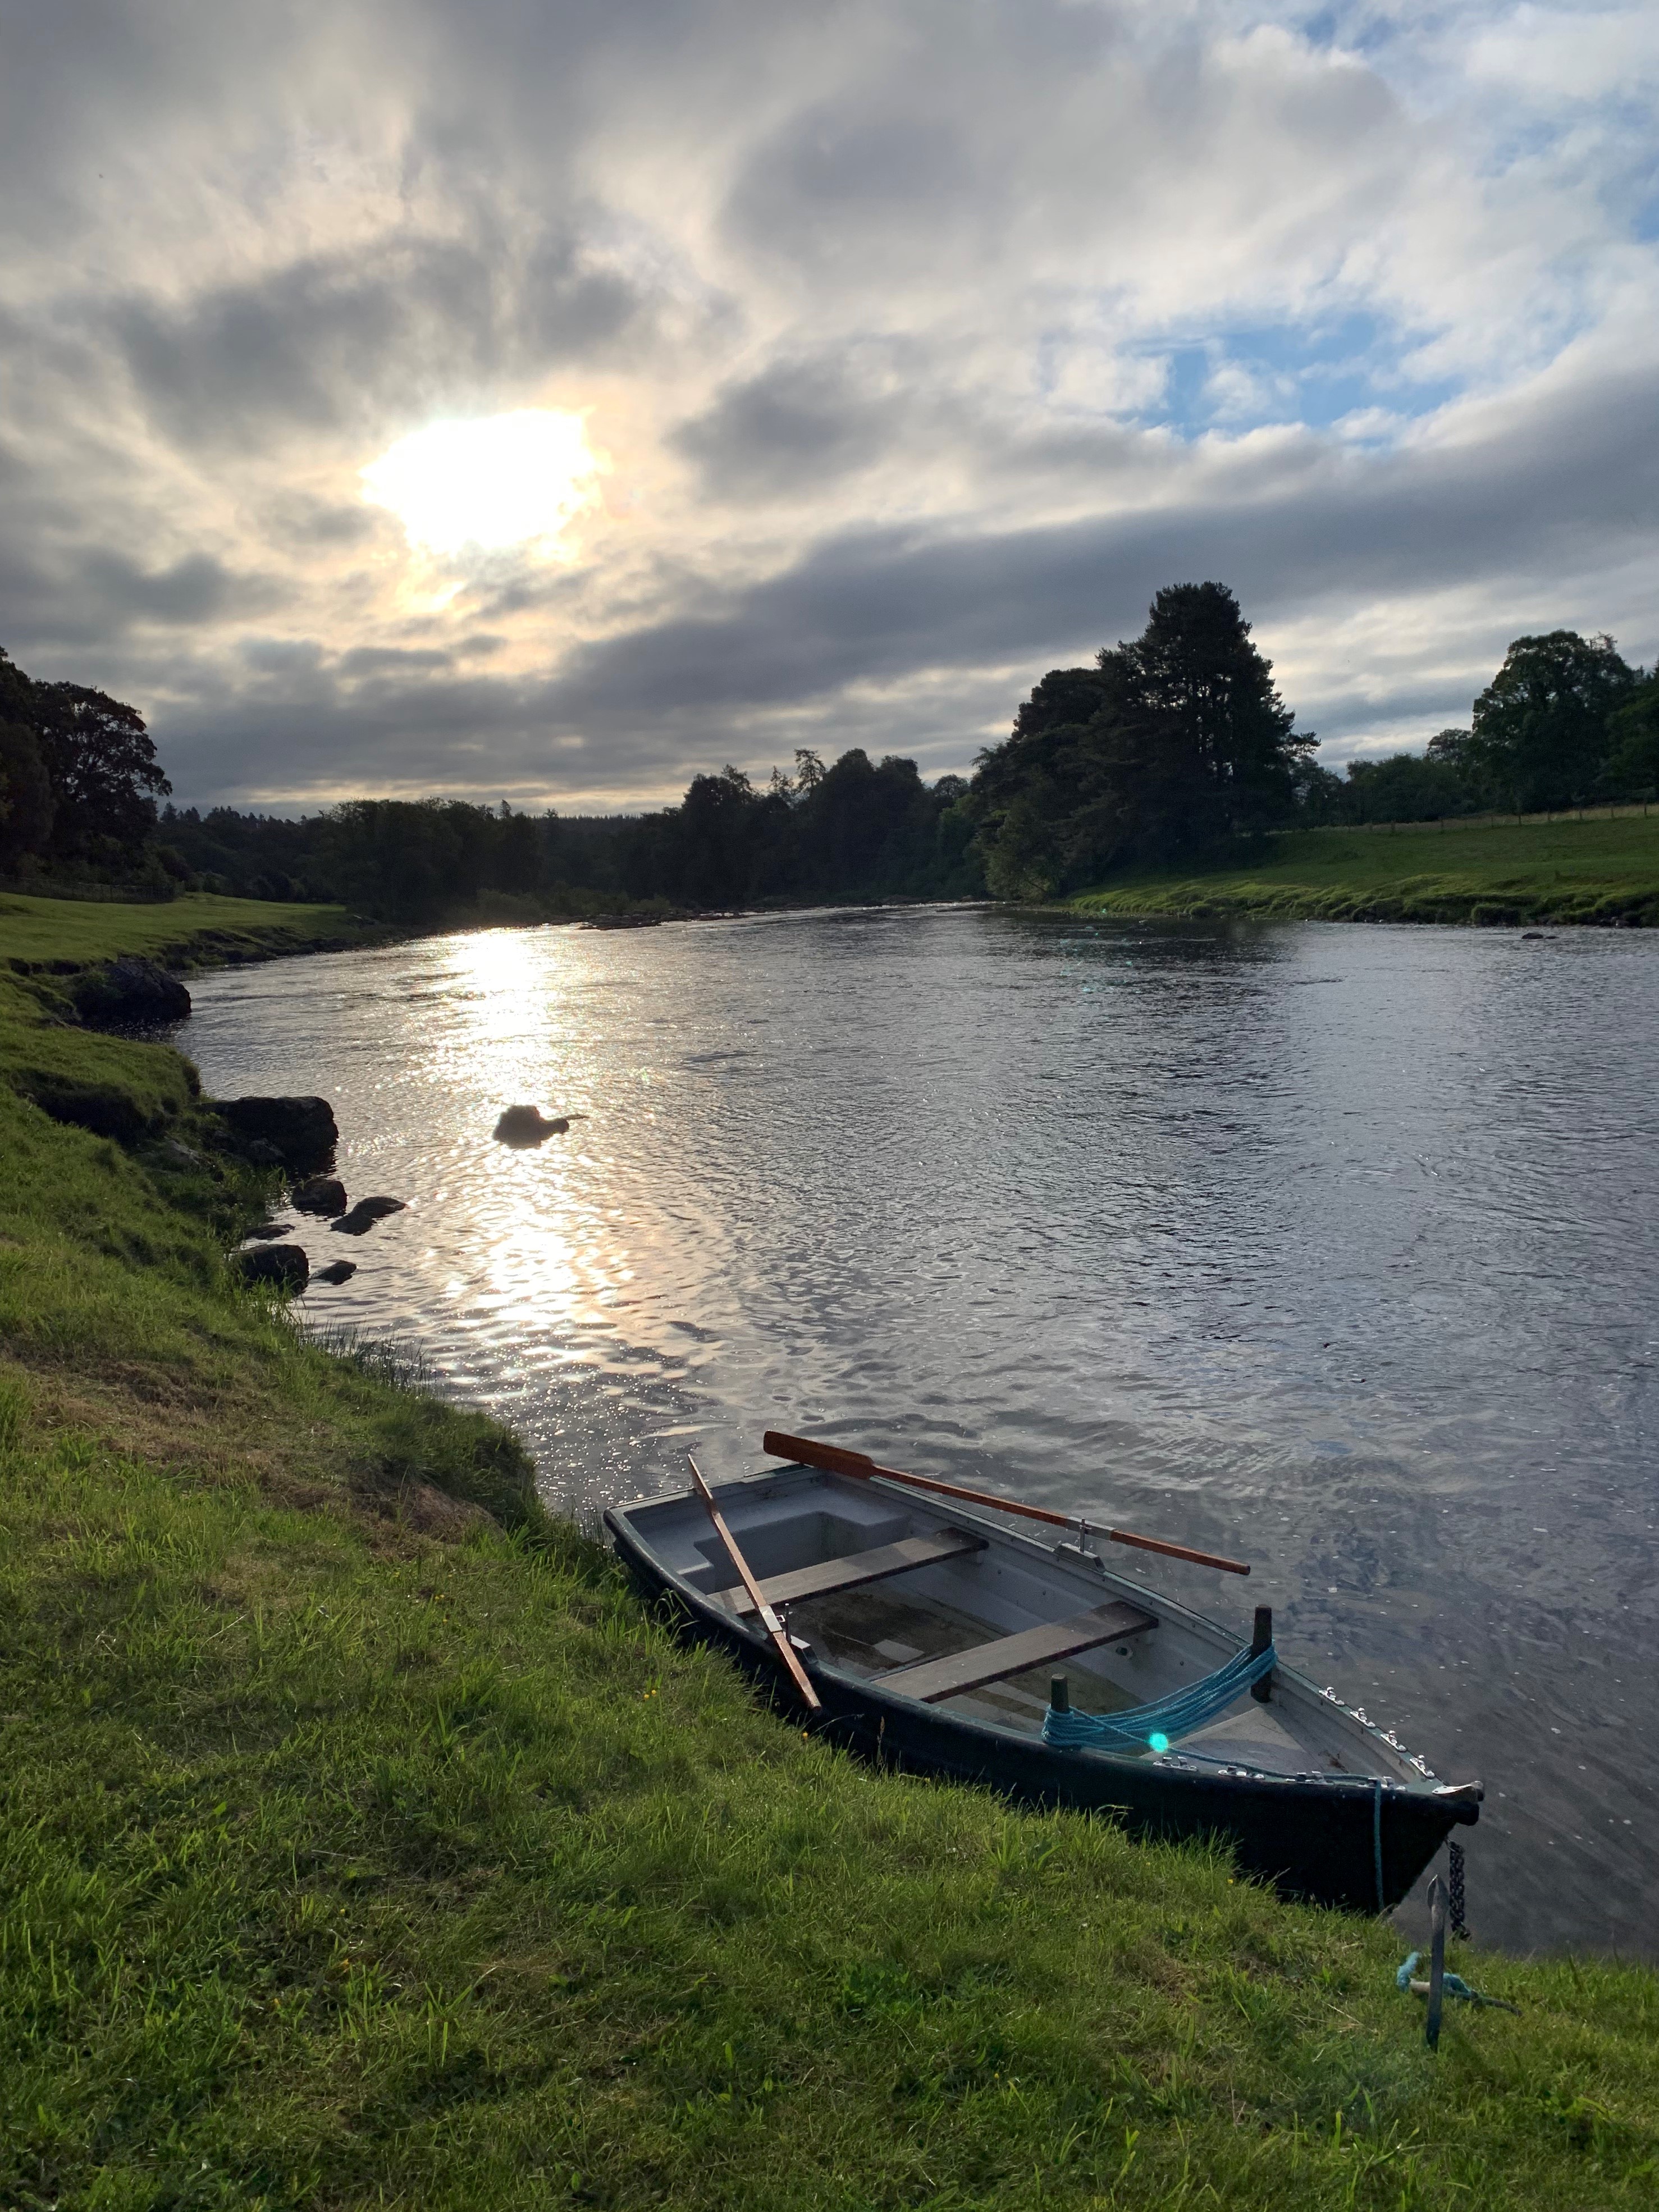 Latest Availability - 29th June 2019